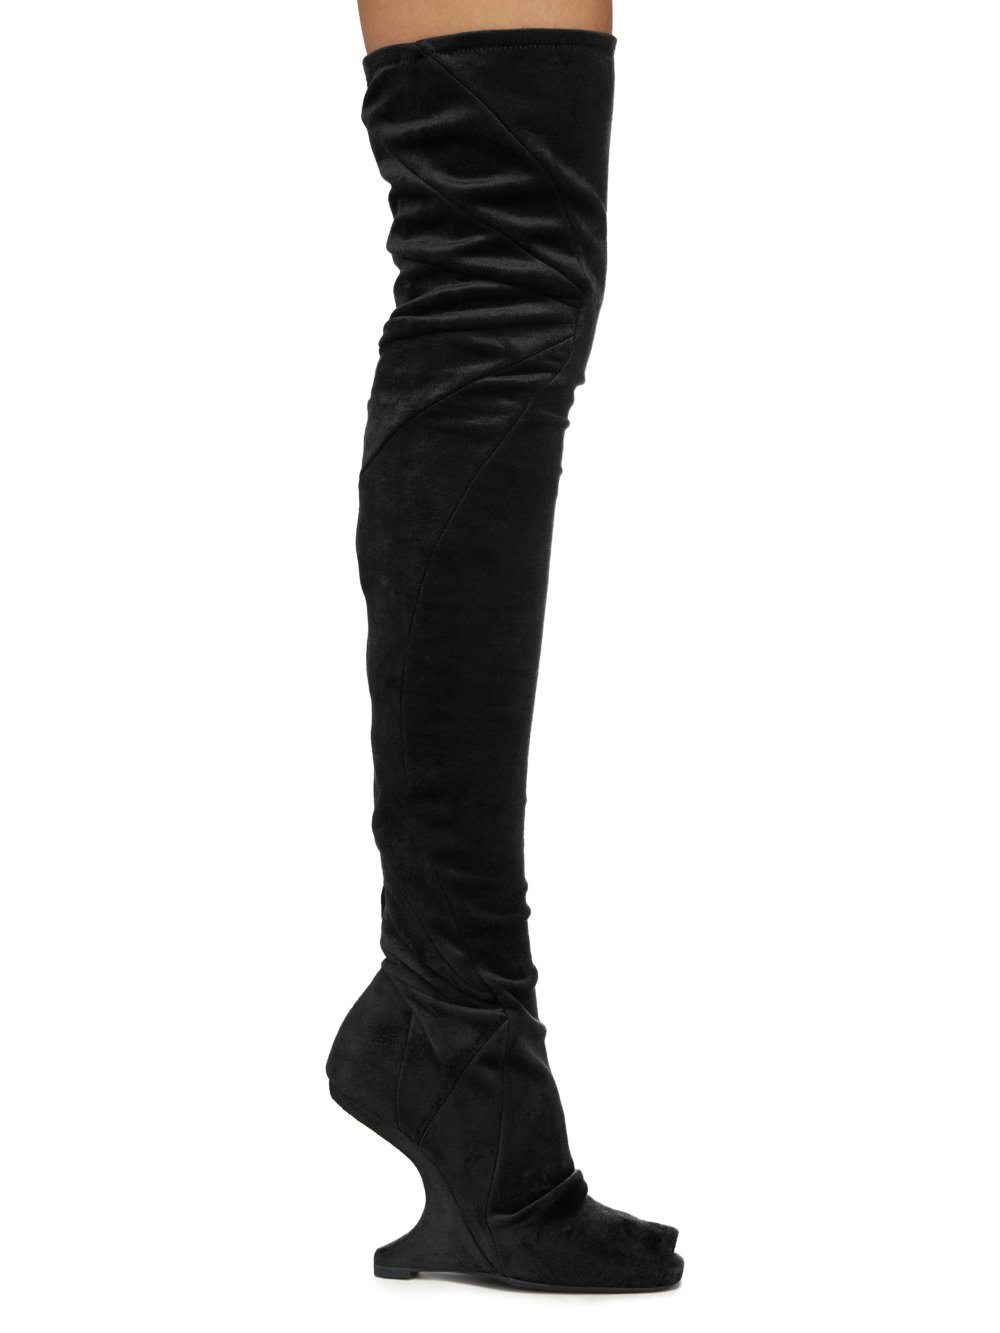 RICK OWENS LILIES FW23 LUXOR CANTILEVER 11 THIGH HIGH BOOT IN BLACK VELVET JERSEY